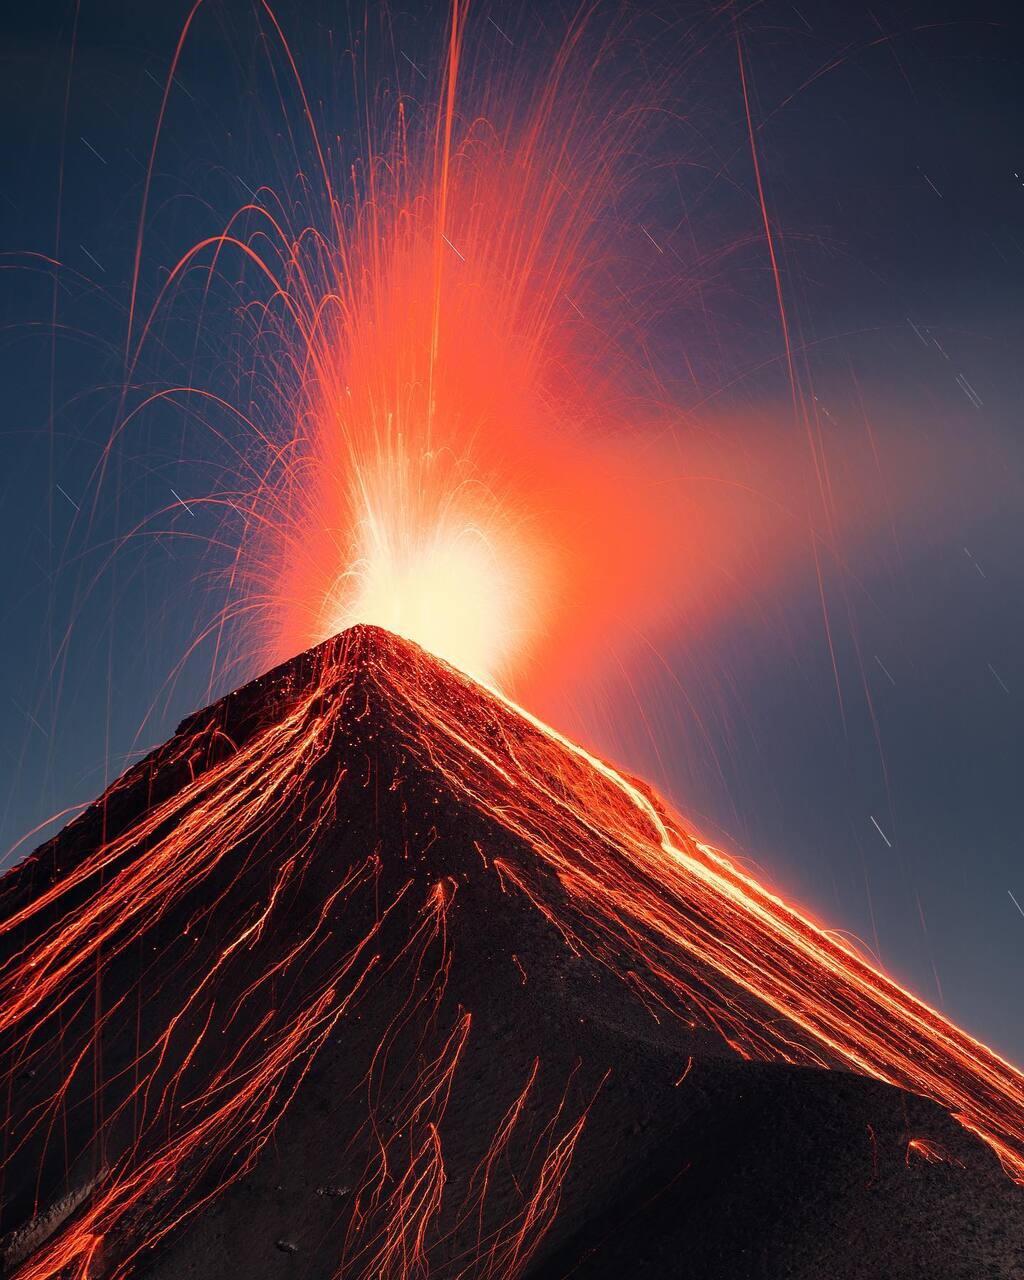 Glowing lava bombs and its ballistic trajectory during the eruption at Fuego volcano in early January (image: Diego Rizzo Photo)